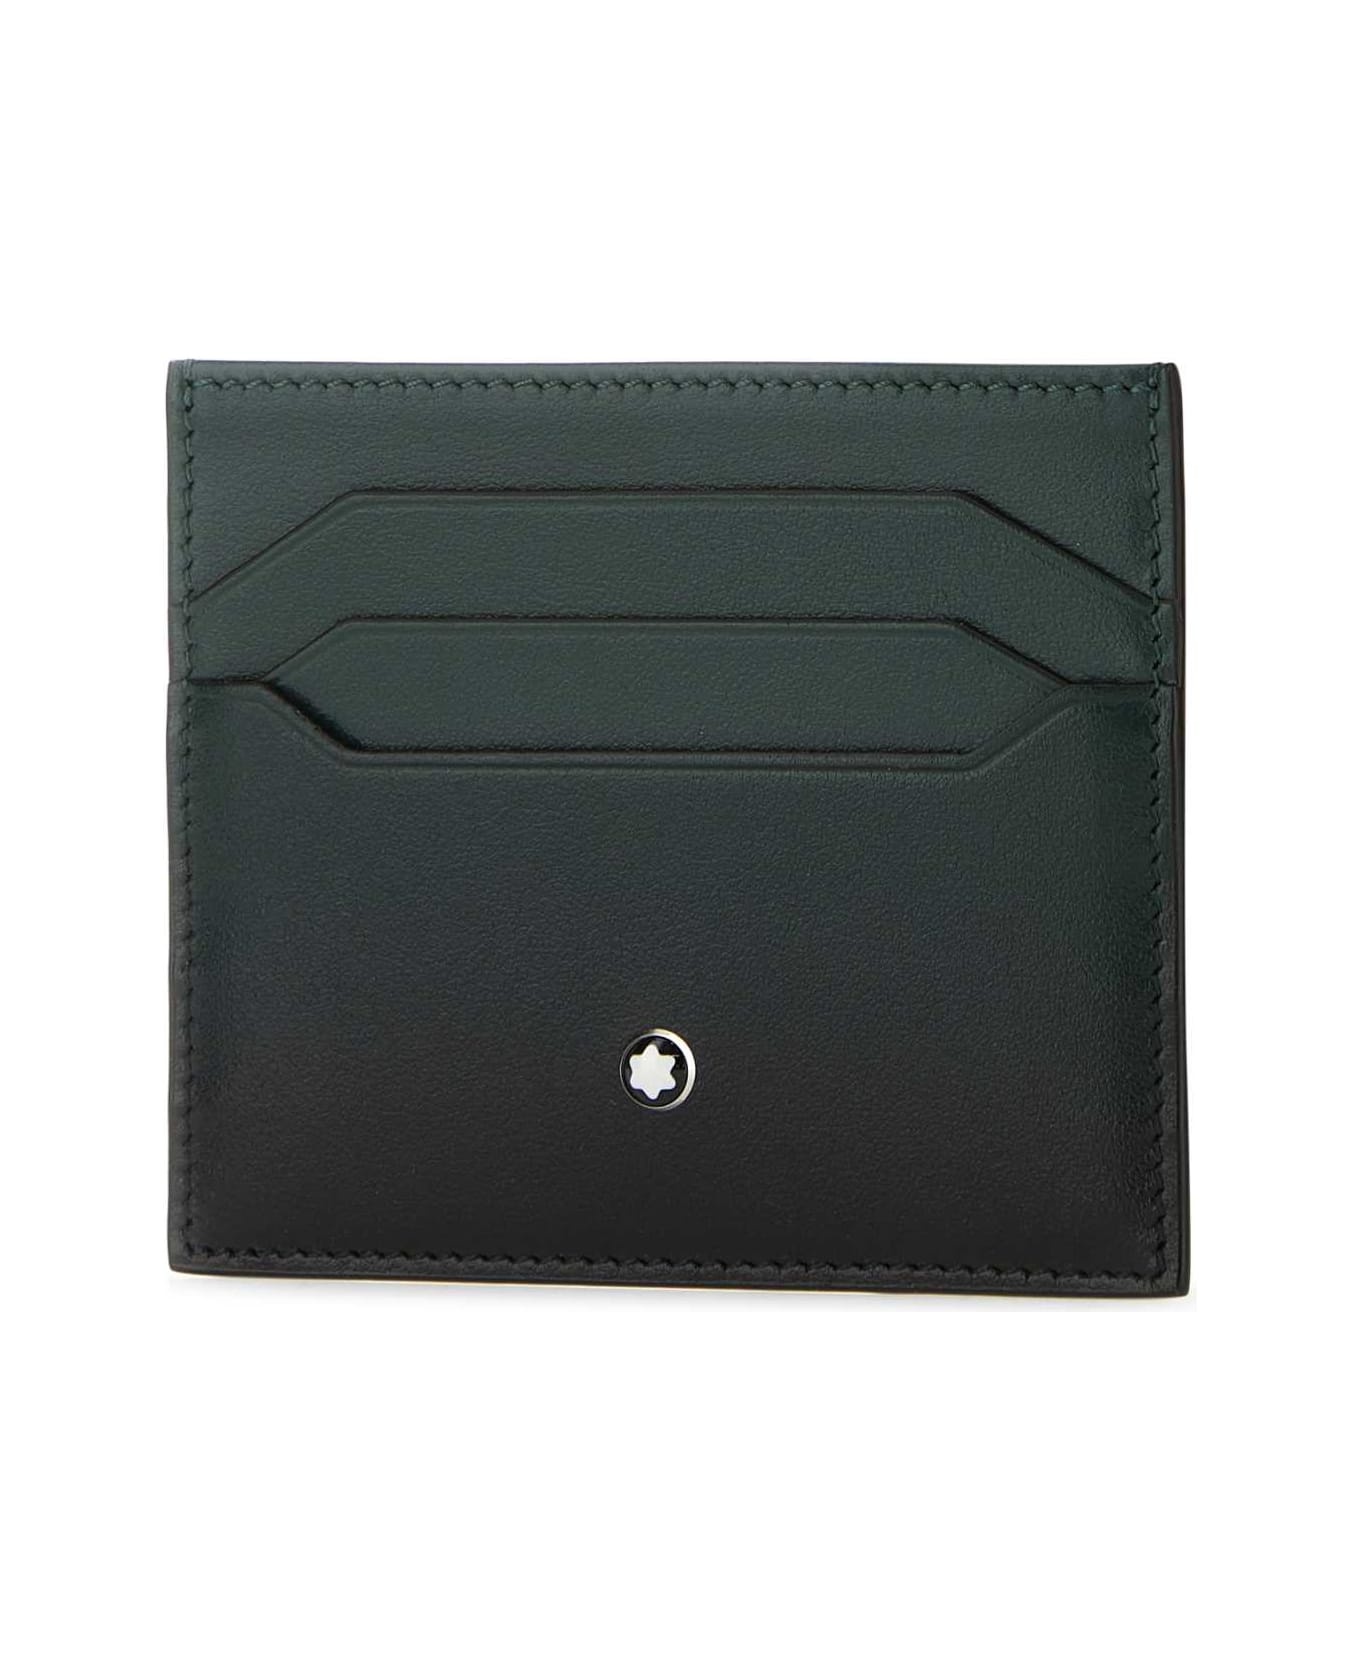 Montblanc Two-tone Leather Card Holder - BRITISHGREEN